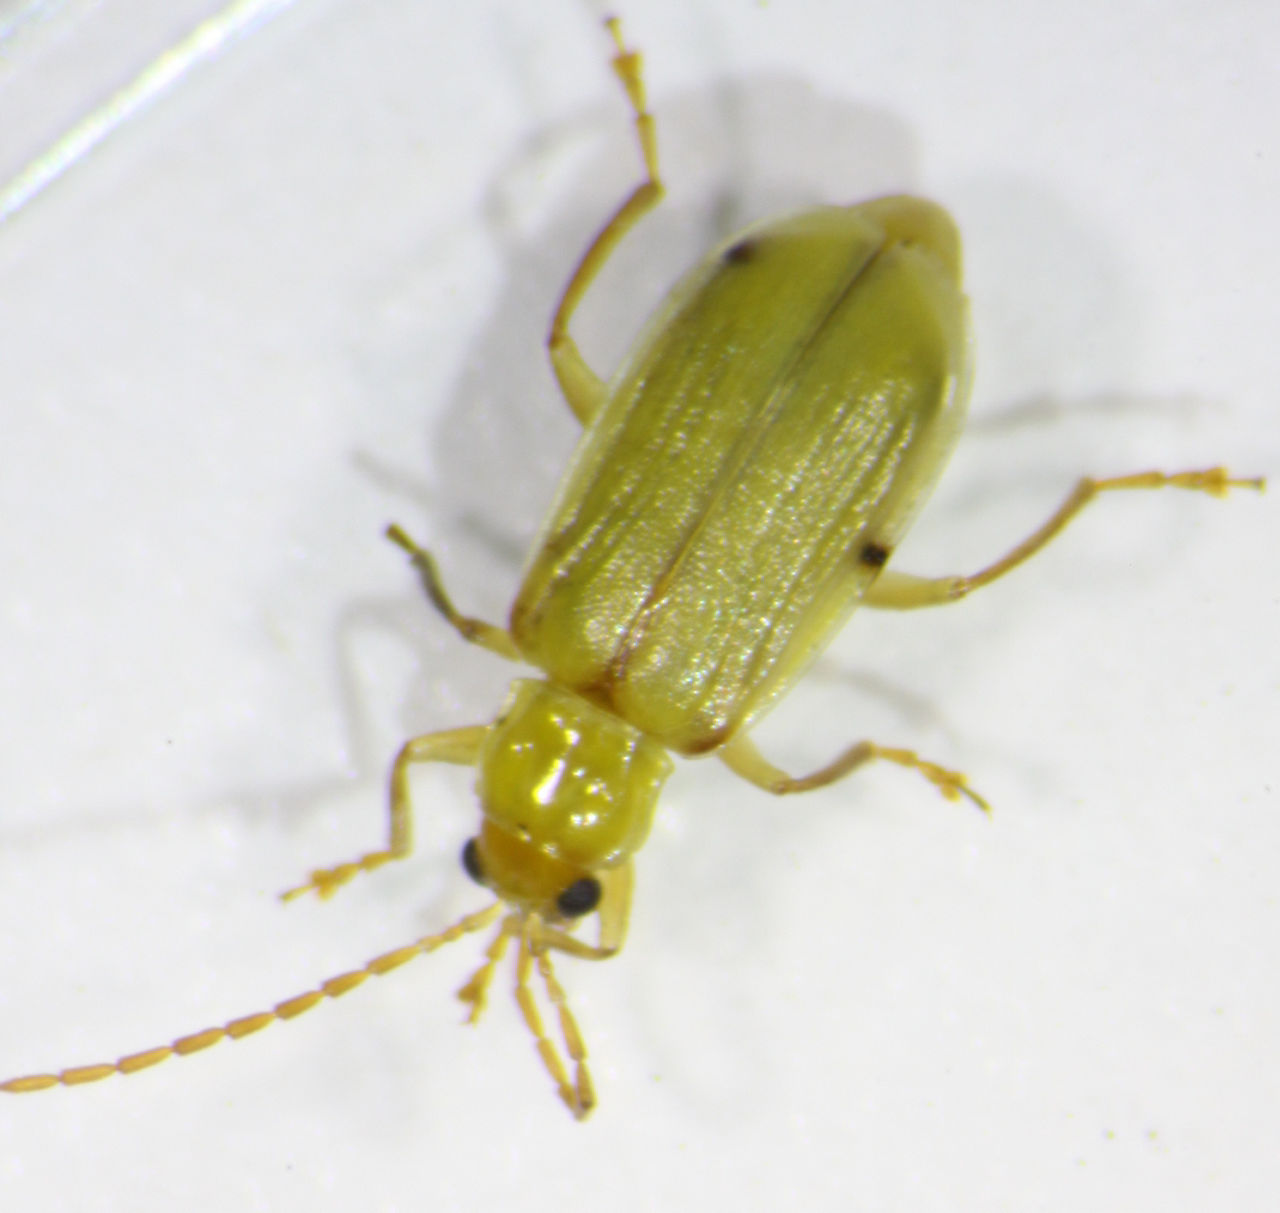 Northern Corn Rootworm - Adult 1